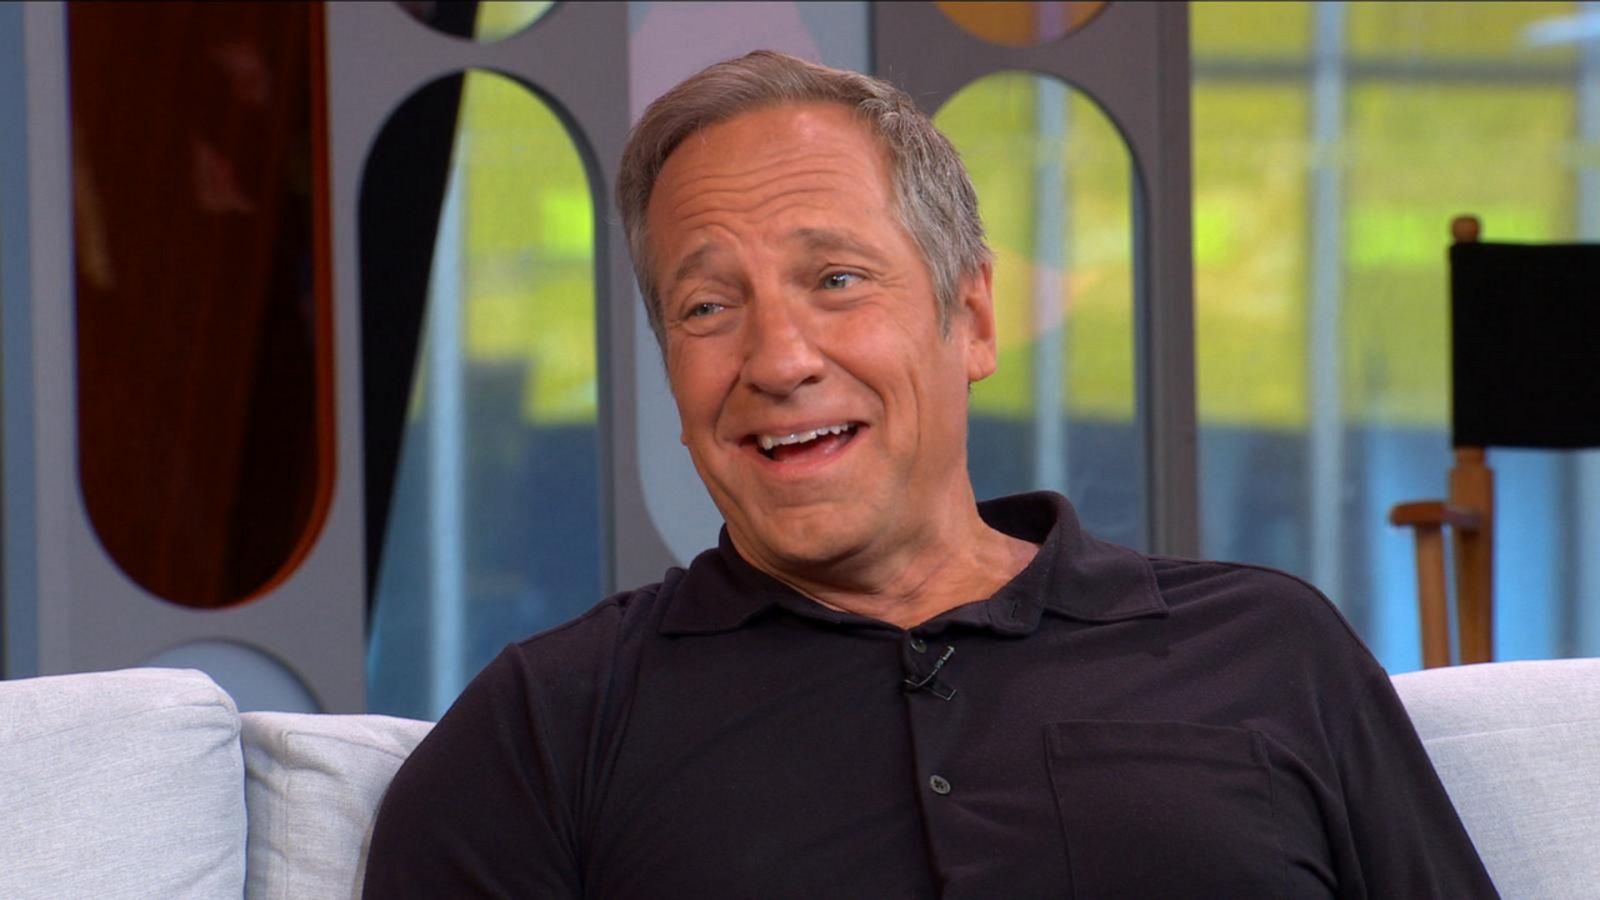 Mike Rowe lived in a haunted mansion - Good Morning America